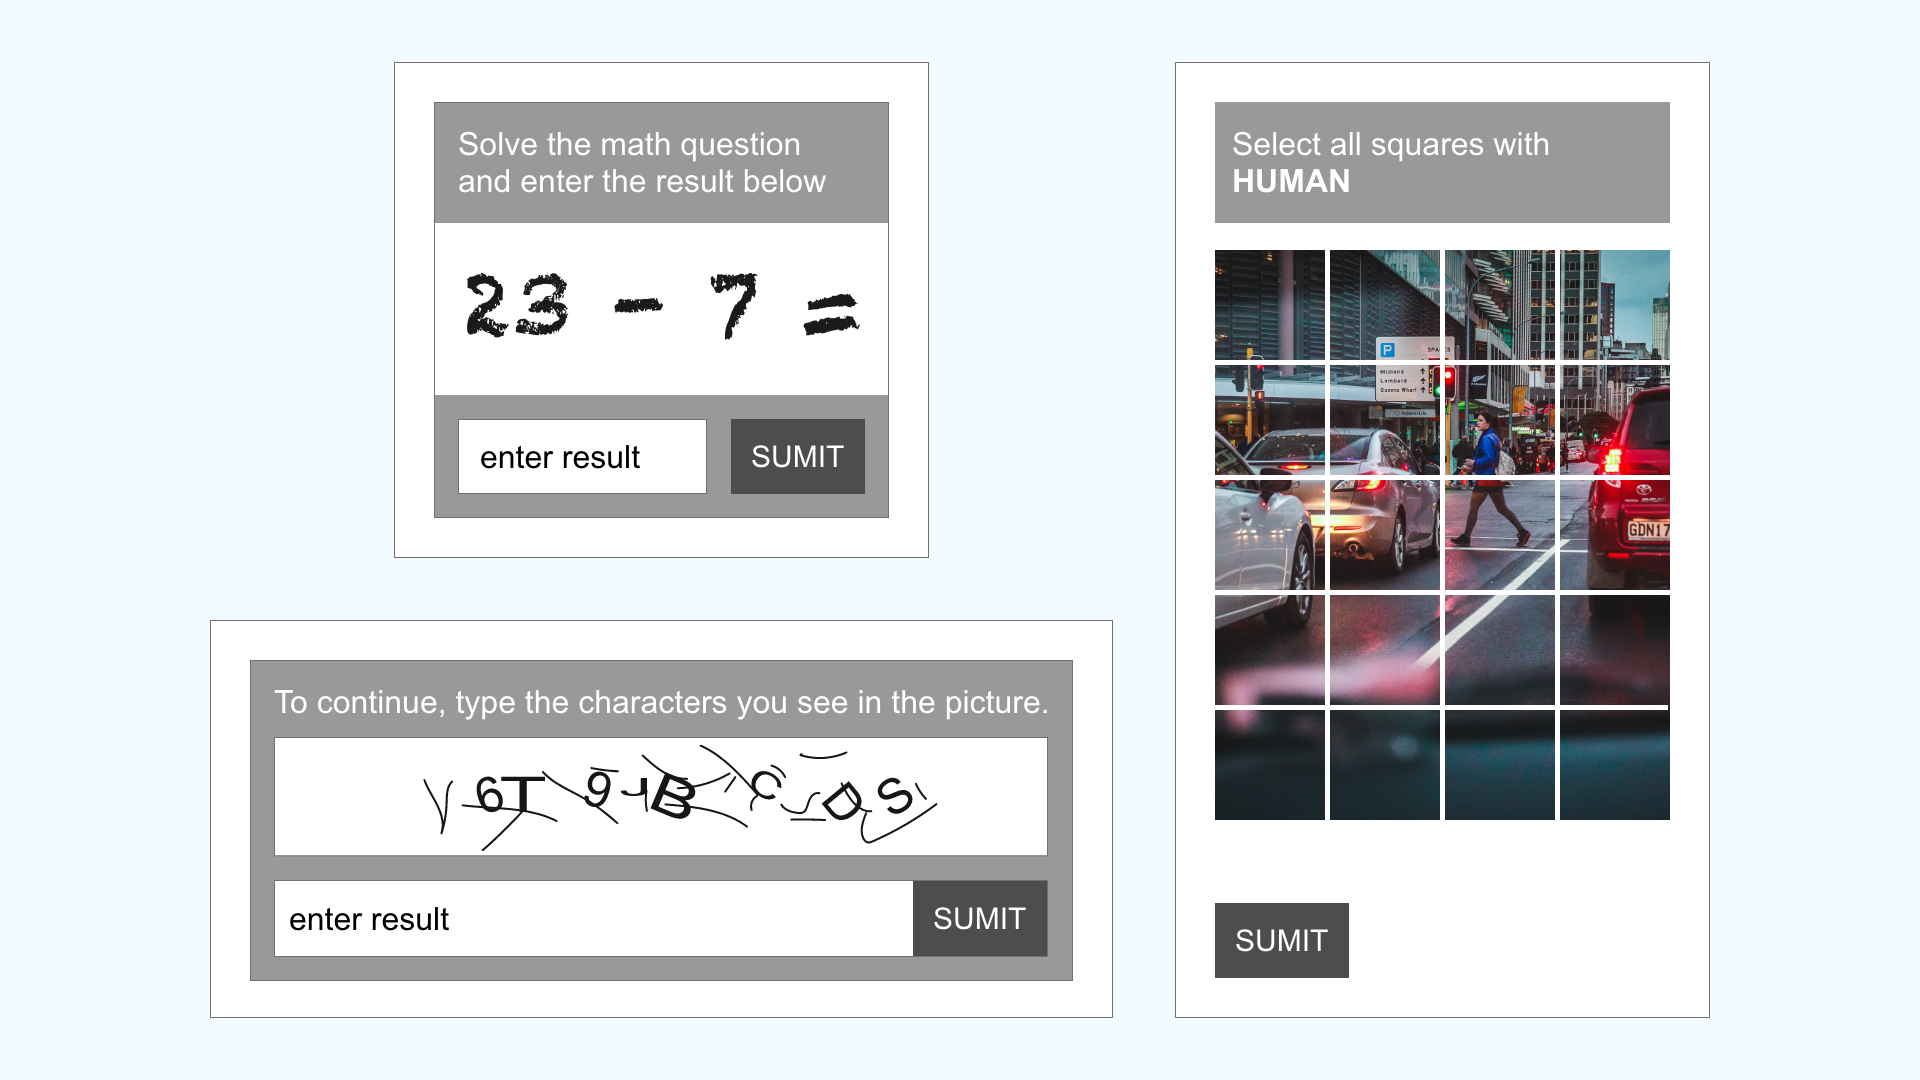 What types of captchas are there and how effective are they in preventing spam and abuse?